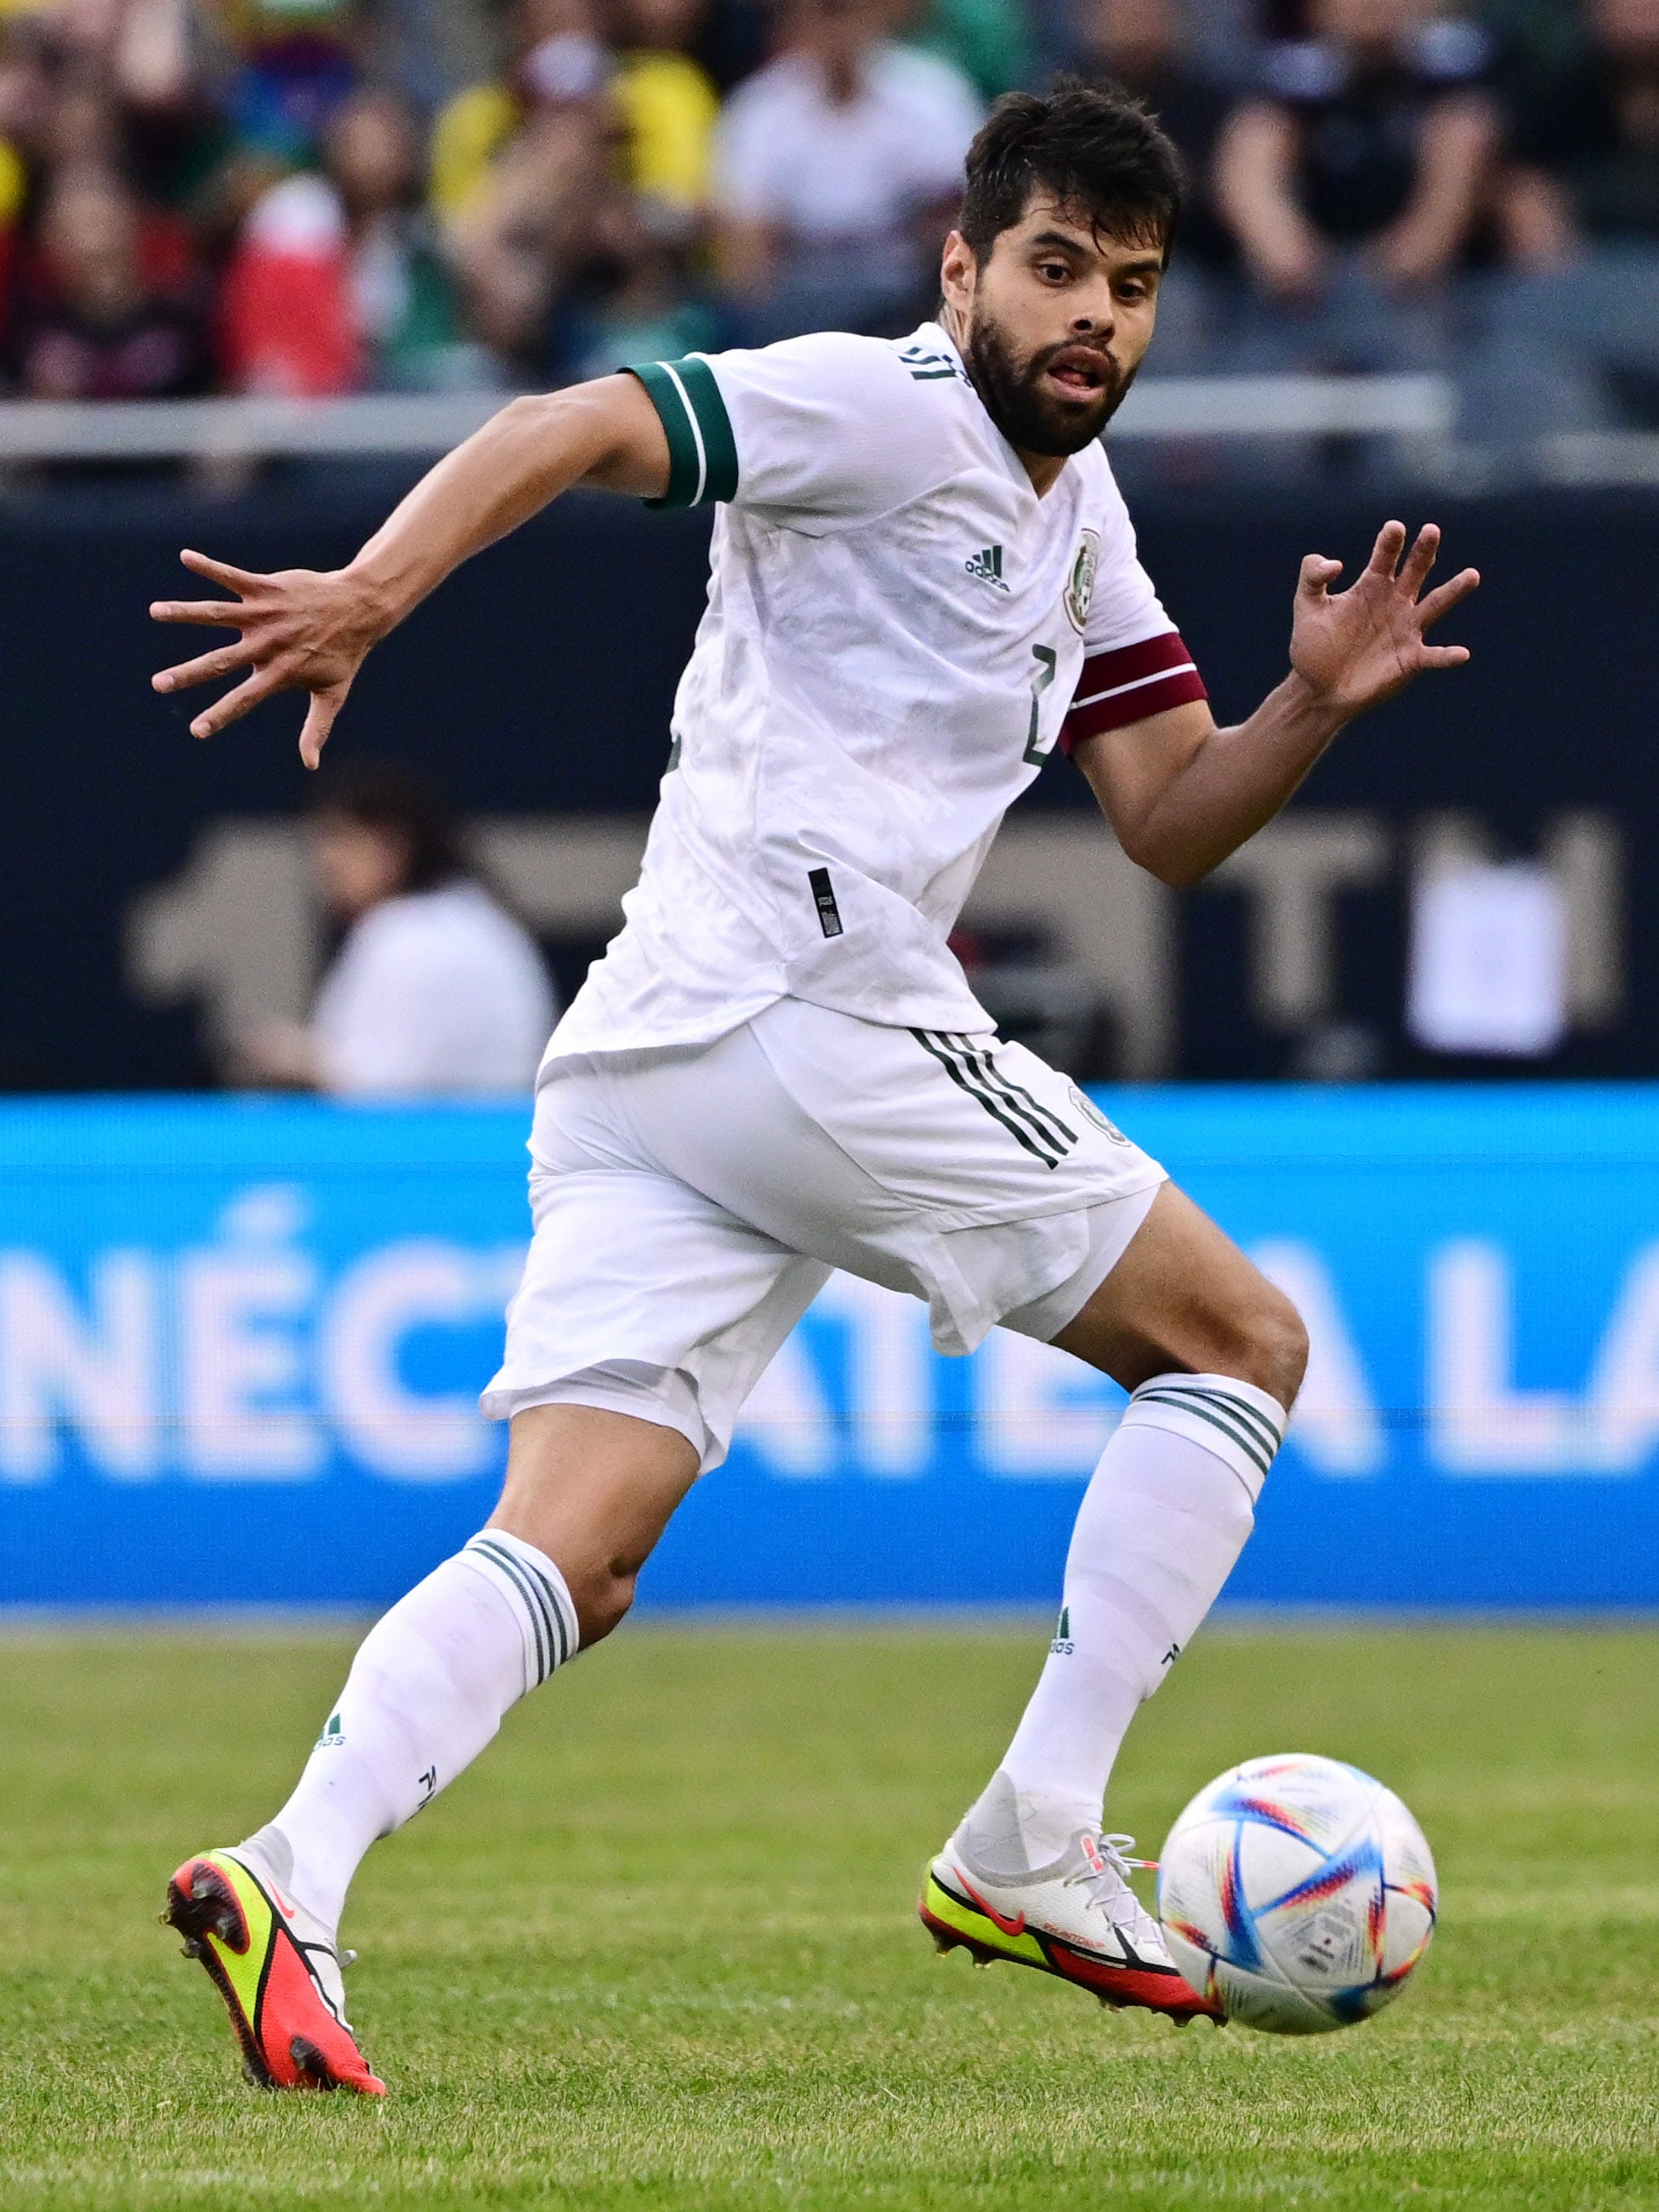 An action image of Nestor Araujo playing soccer.